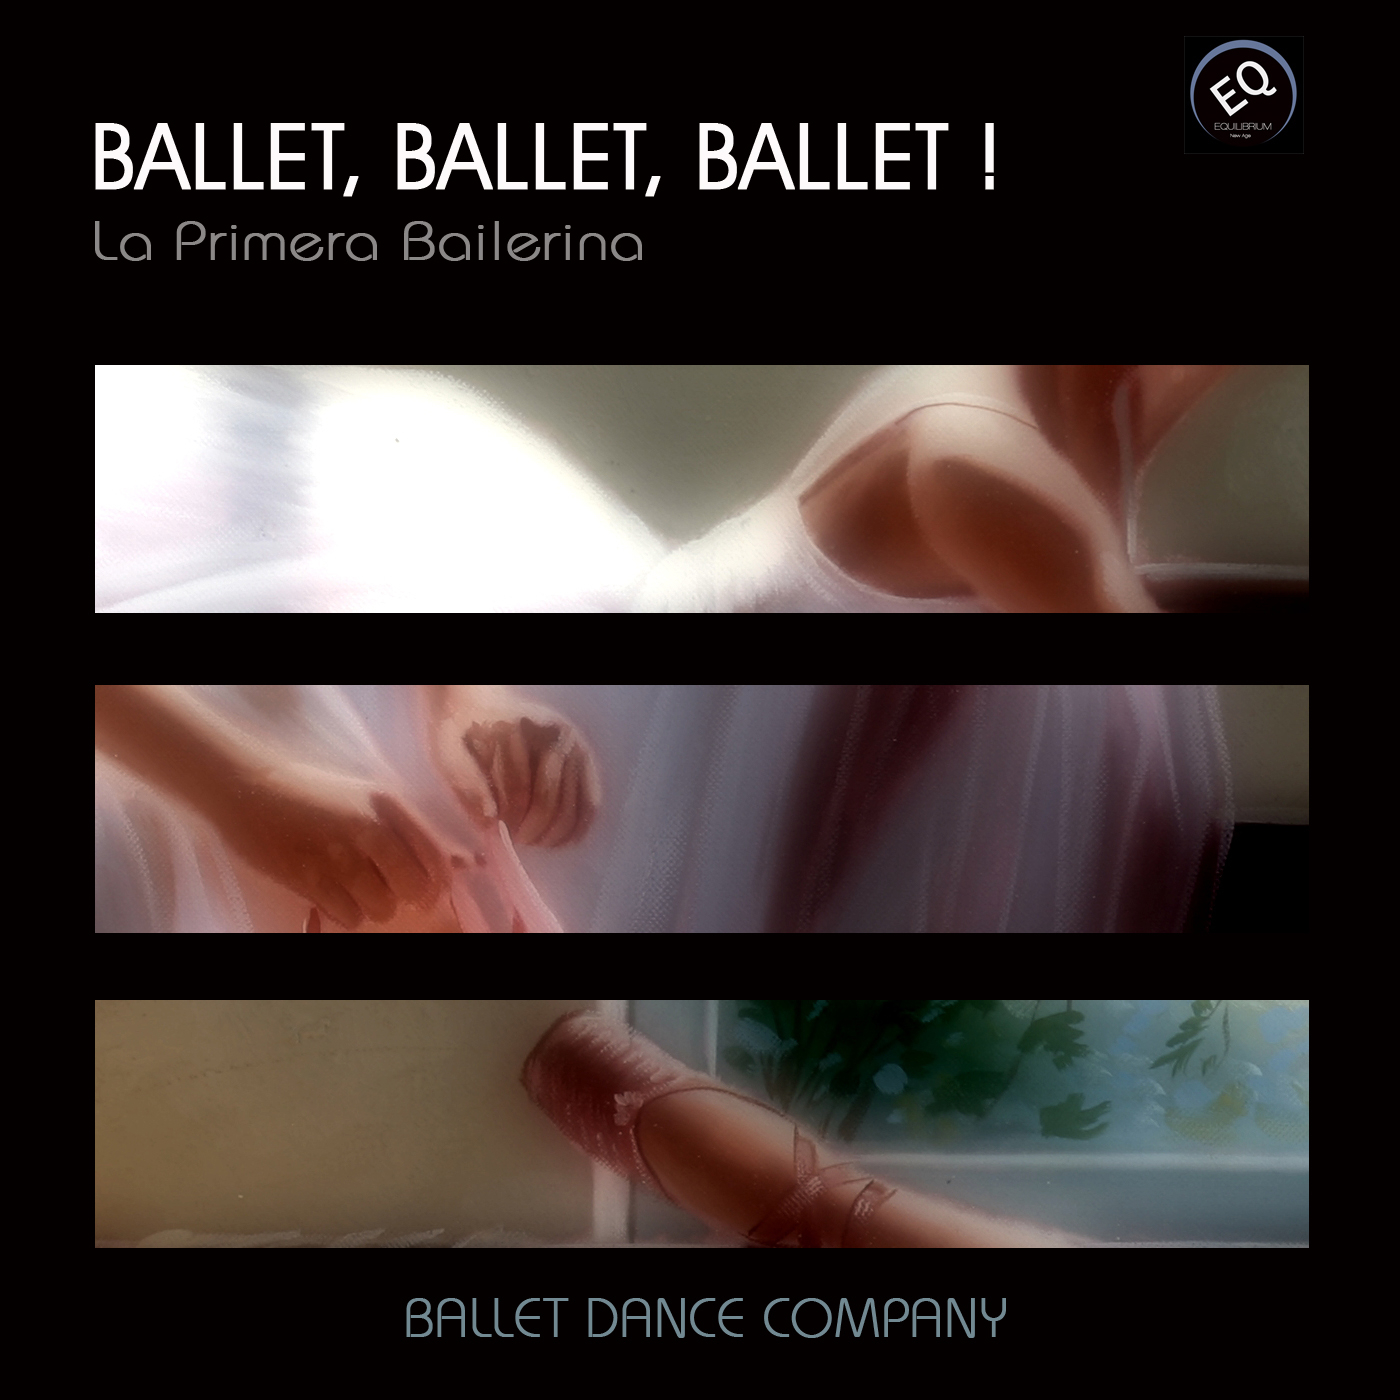 Fun Ballet - Musical Preparation Given for This Track